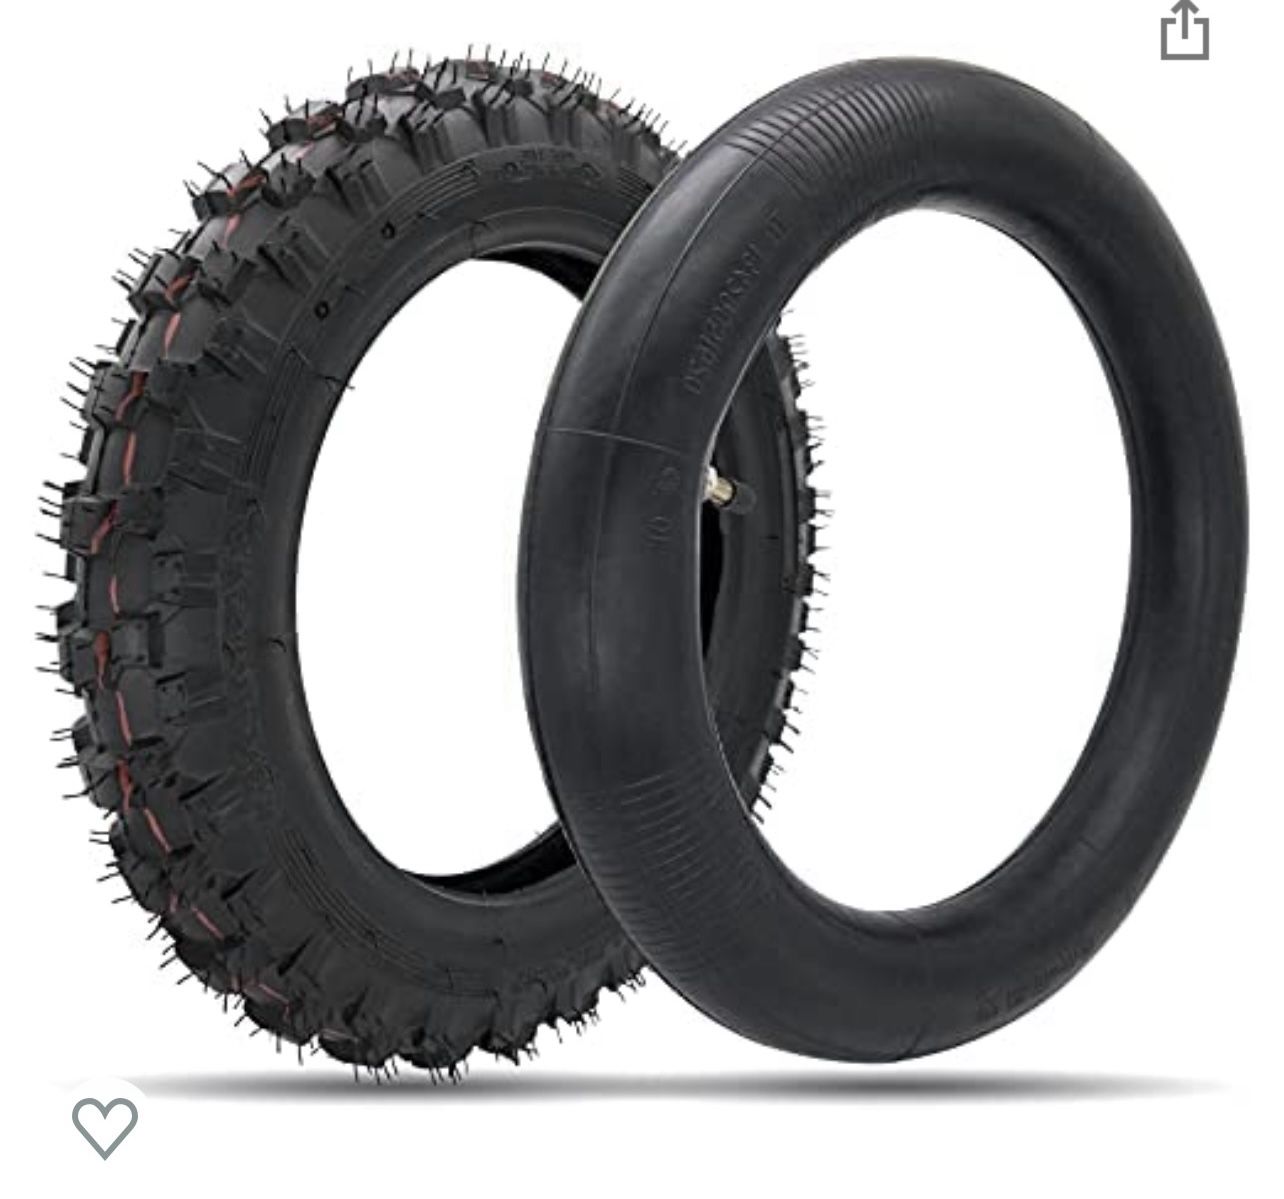 2.5-10" Off-Road Tire and Inner Tube Set, Dirt Bike Tire with 10- Inch Rim and 2.5/2.75-10 Dirt Bike Inner Tube Replacement, Compatible with Honda CRF